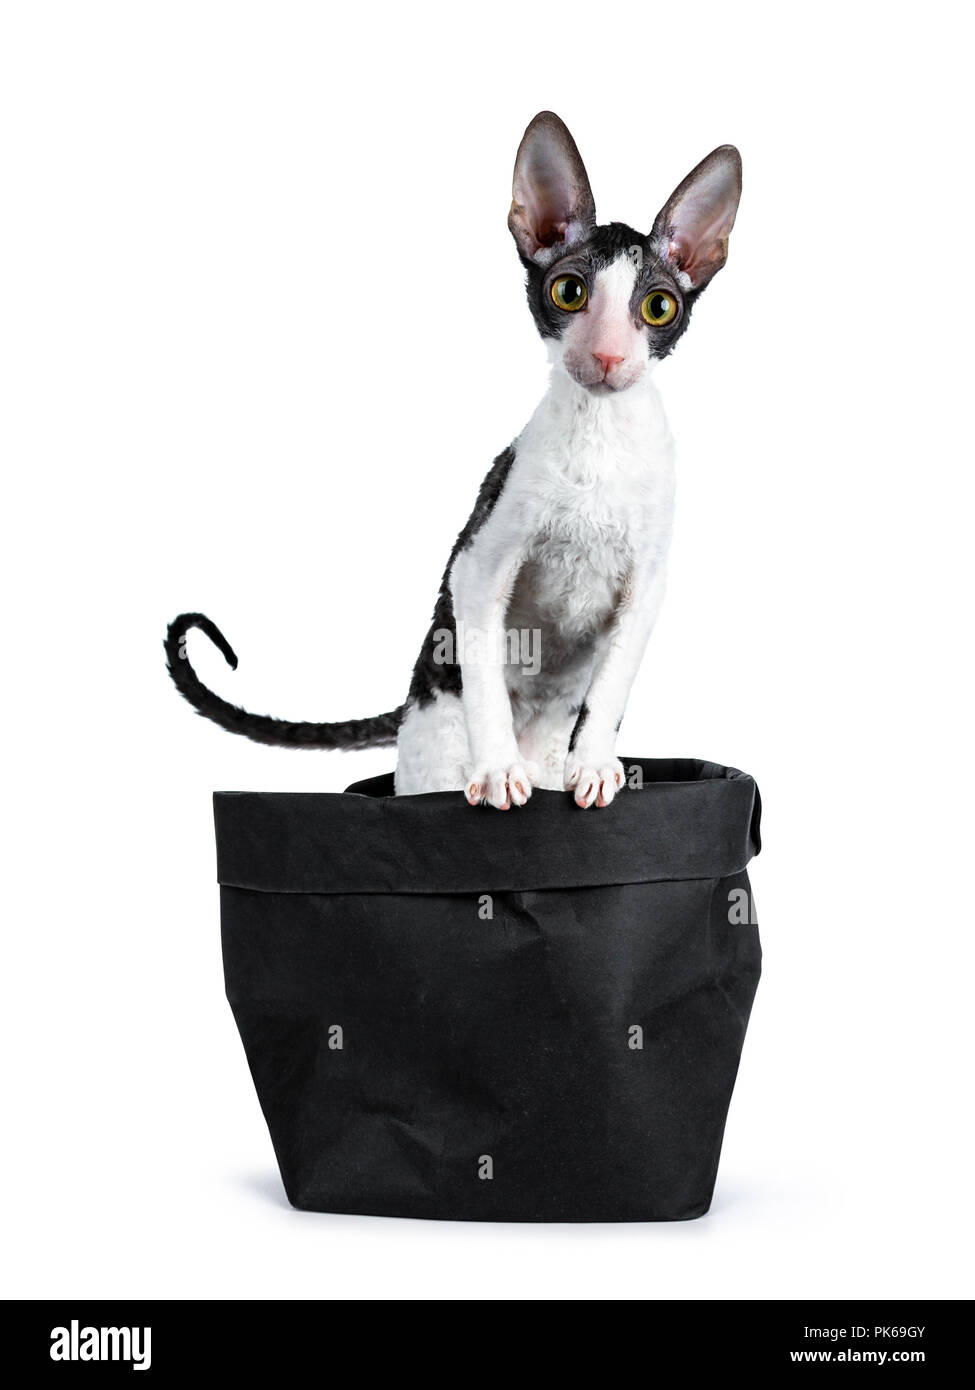 Amazing black bicolor Cornish Rex cat kitten girl standing in black bag with front paws on edge of bag, looking curious to camera isolated on a white Stock Photo